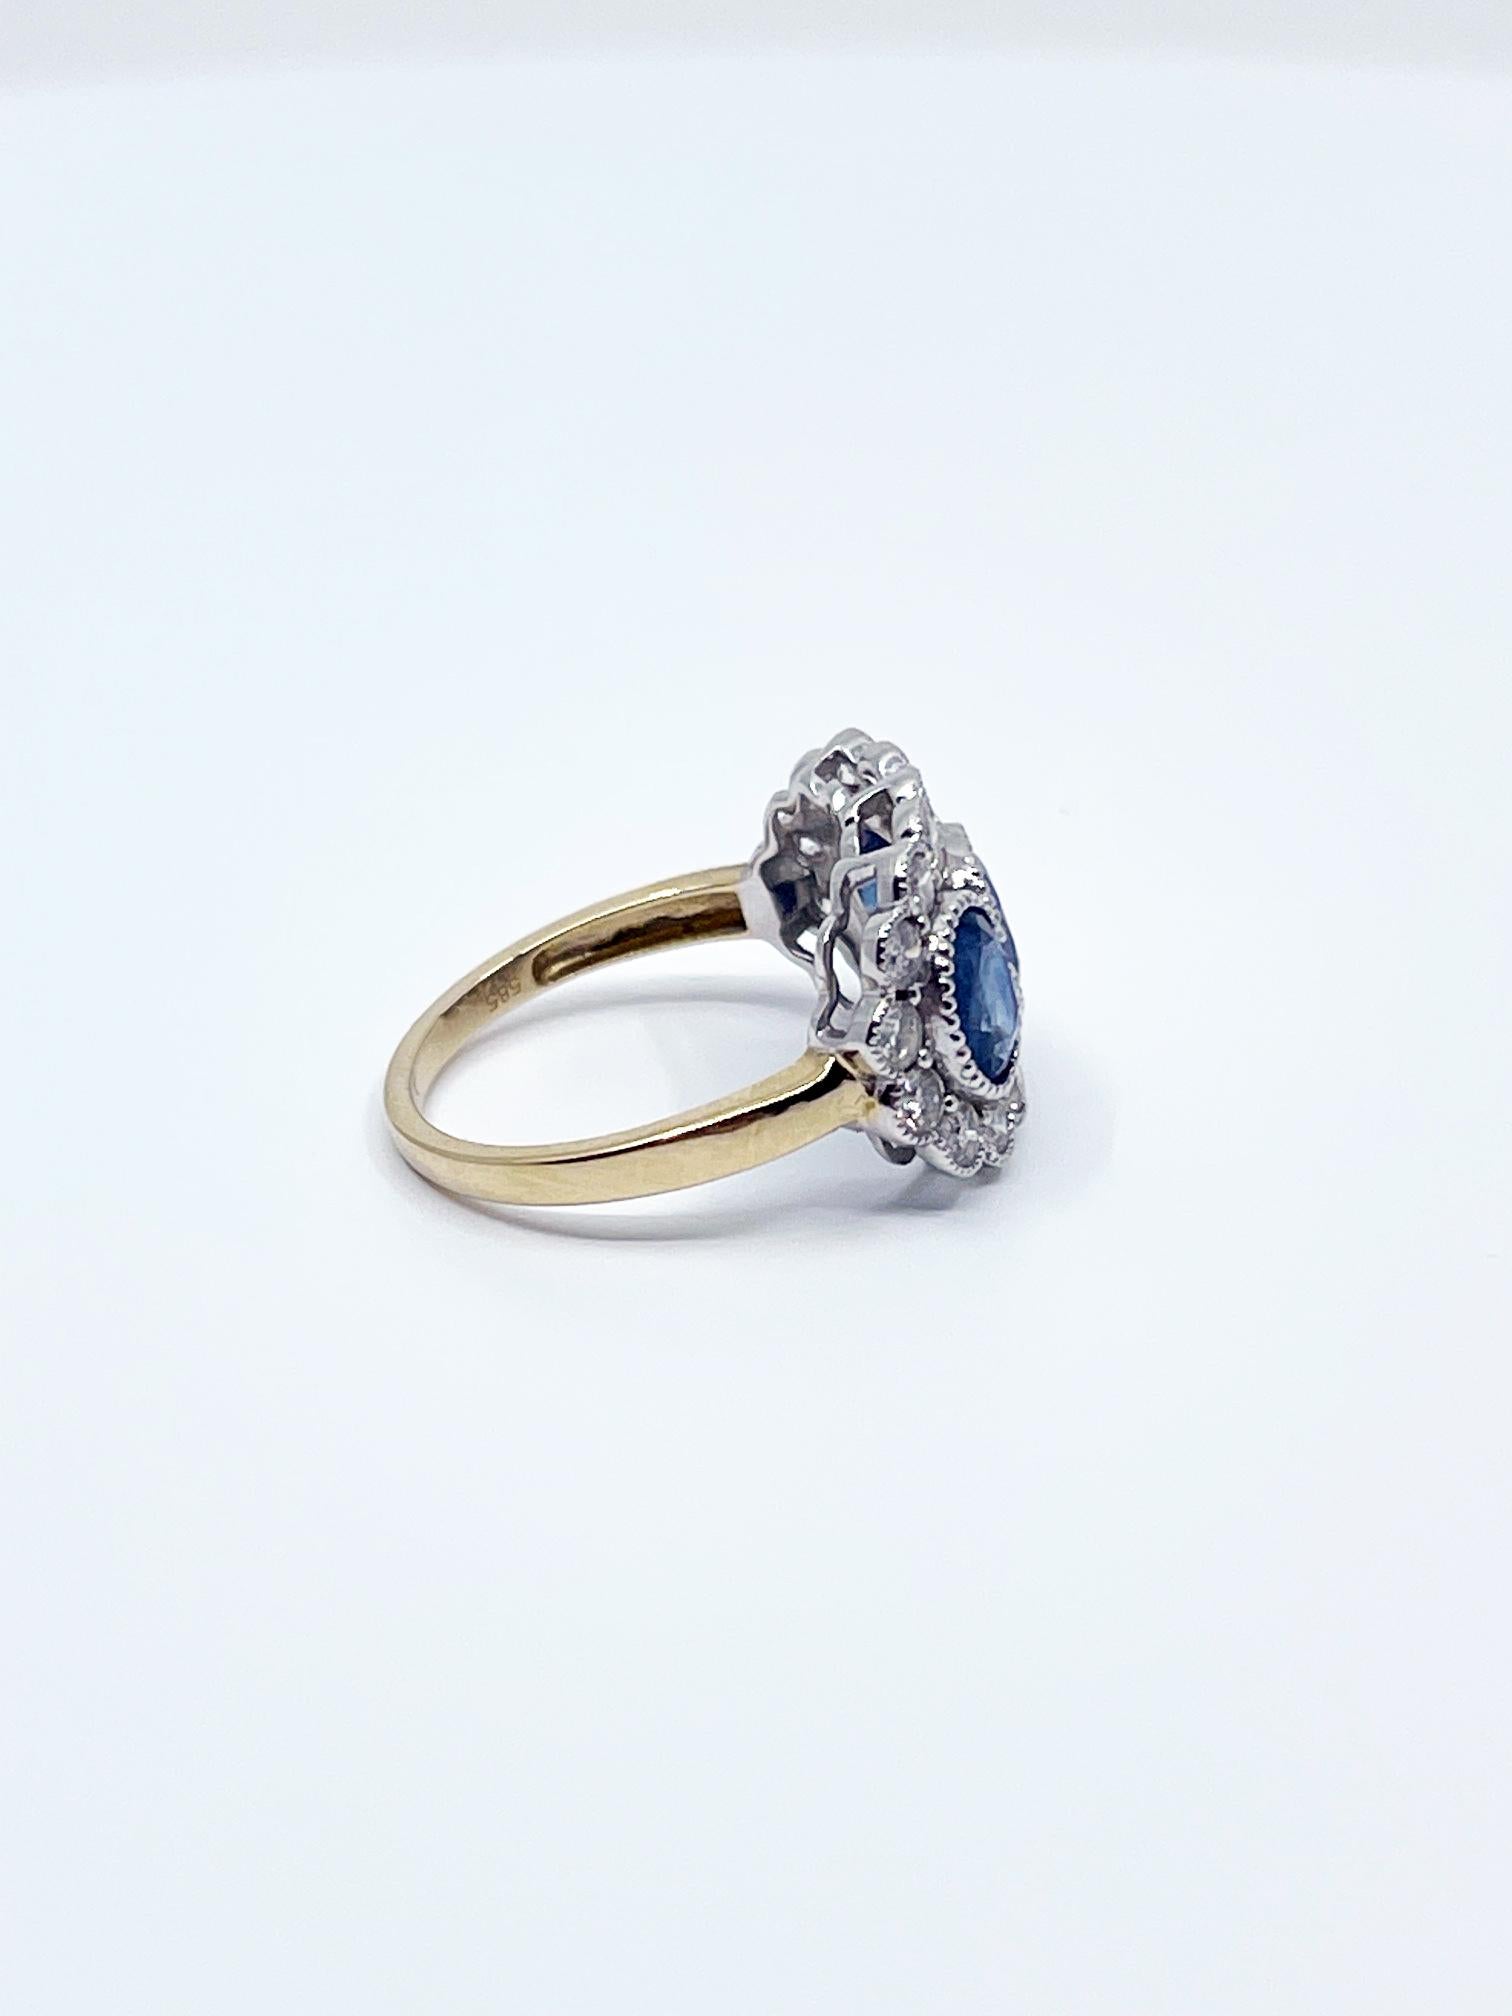 Total weight 3.13ct sapphires surrounded by 18 diamonds (1ctw). Set in 14ct yellow and white gold two tone effect with detailed milgrain edging. 

The blue of the sapphires in the light is incredible.

Ring size M.

